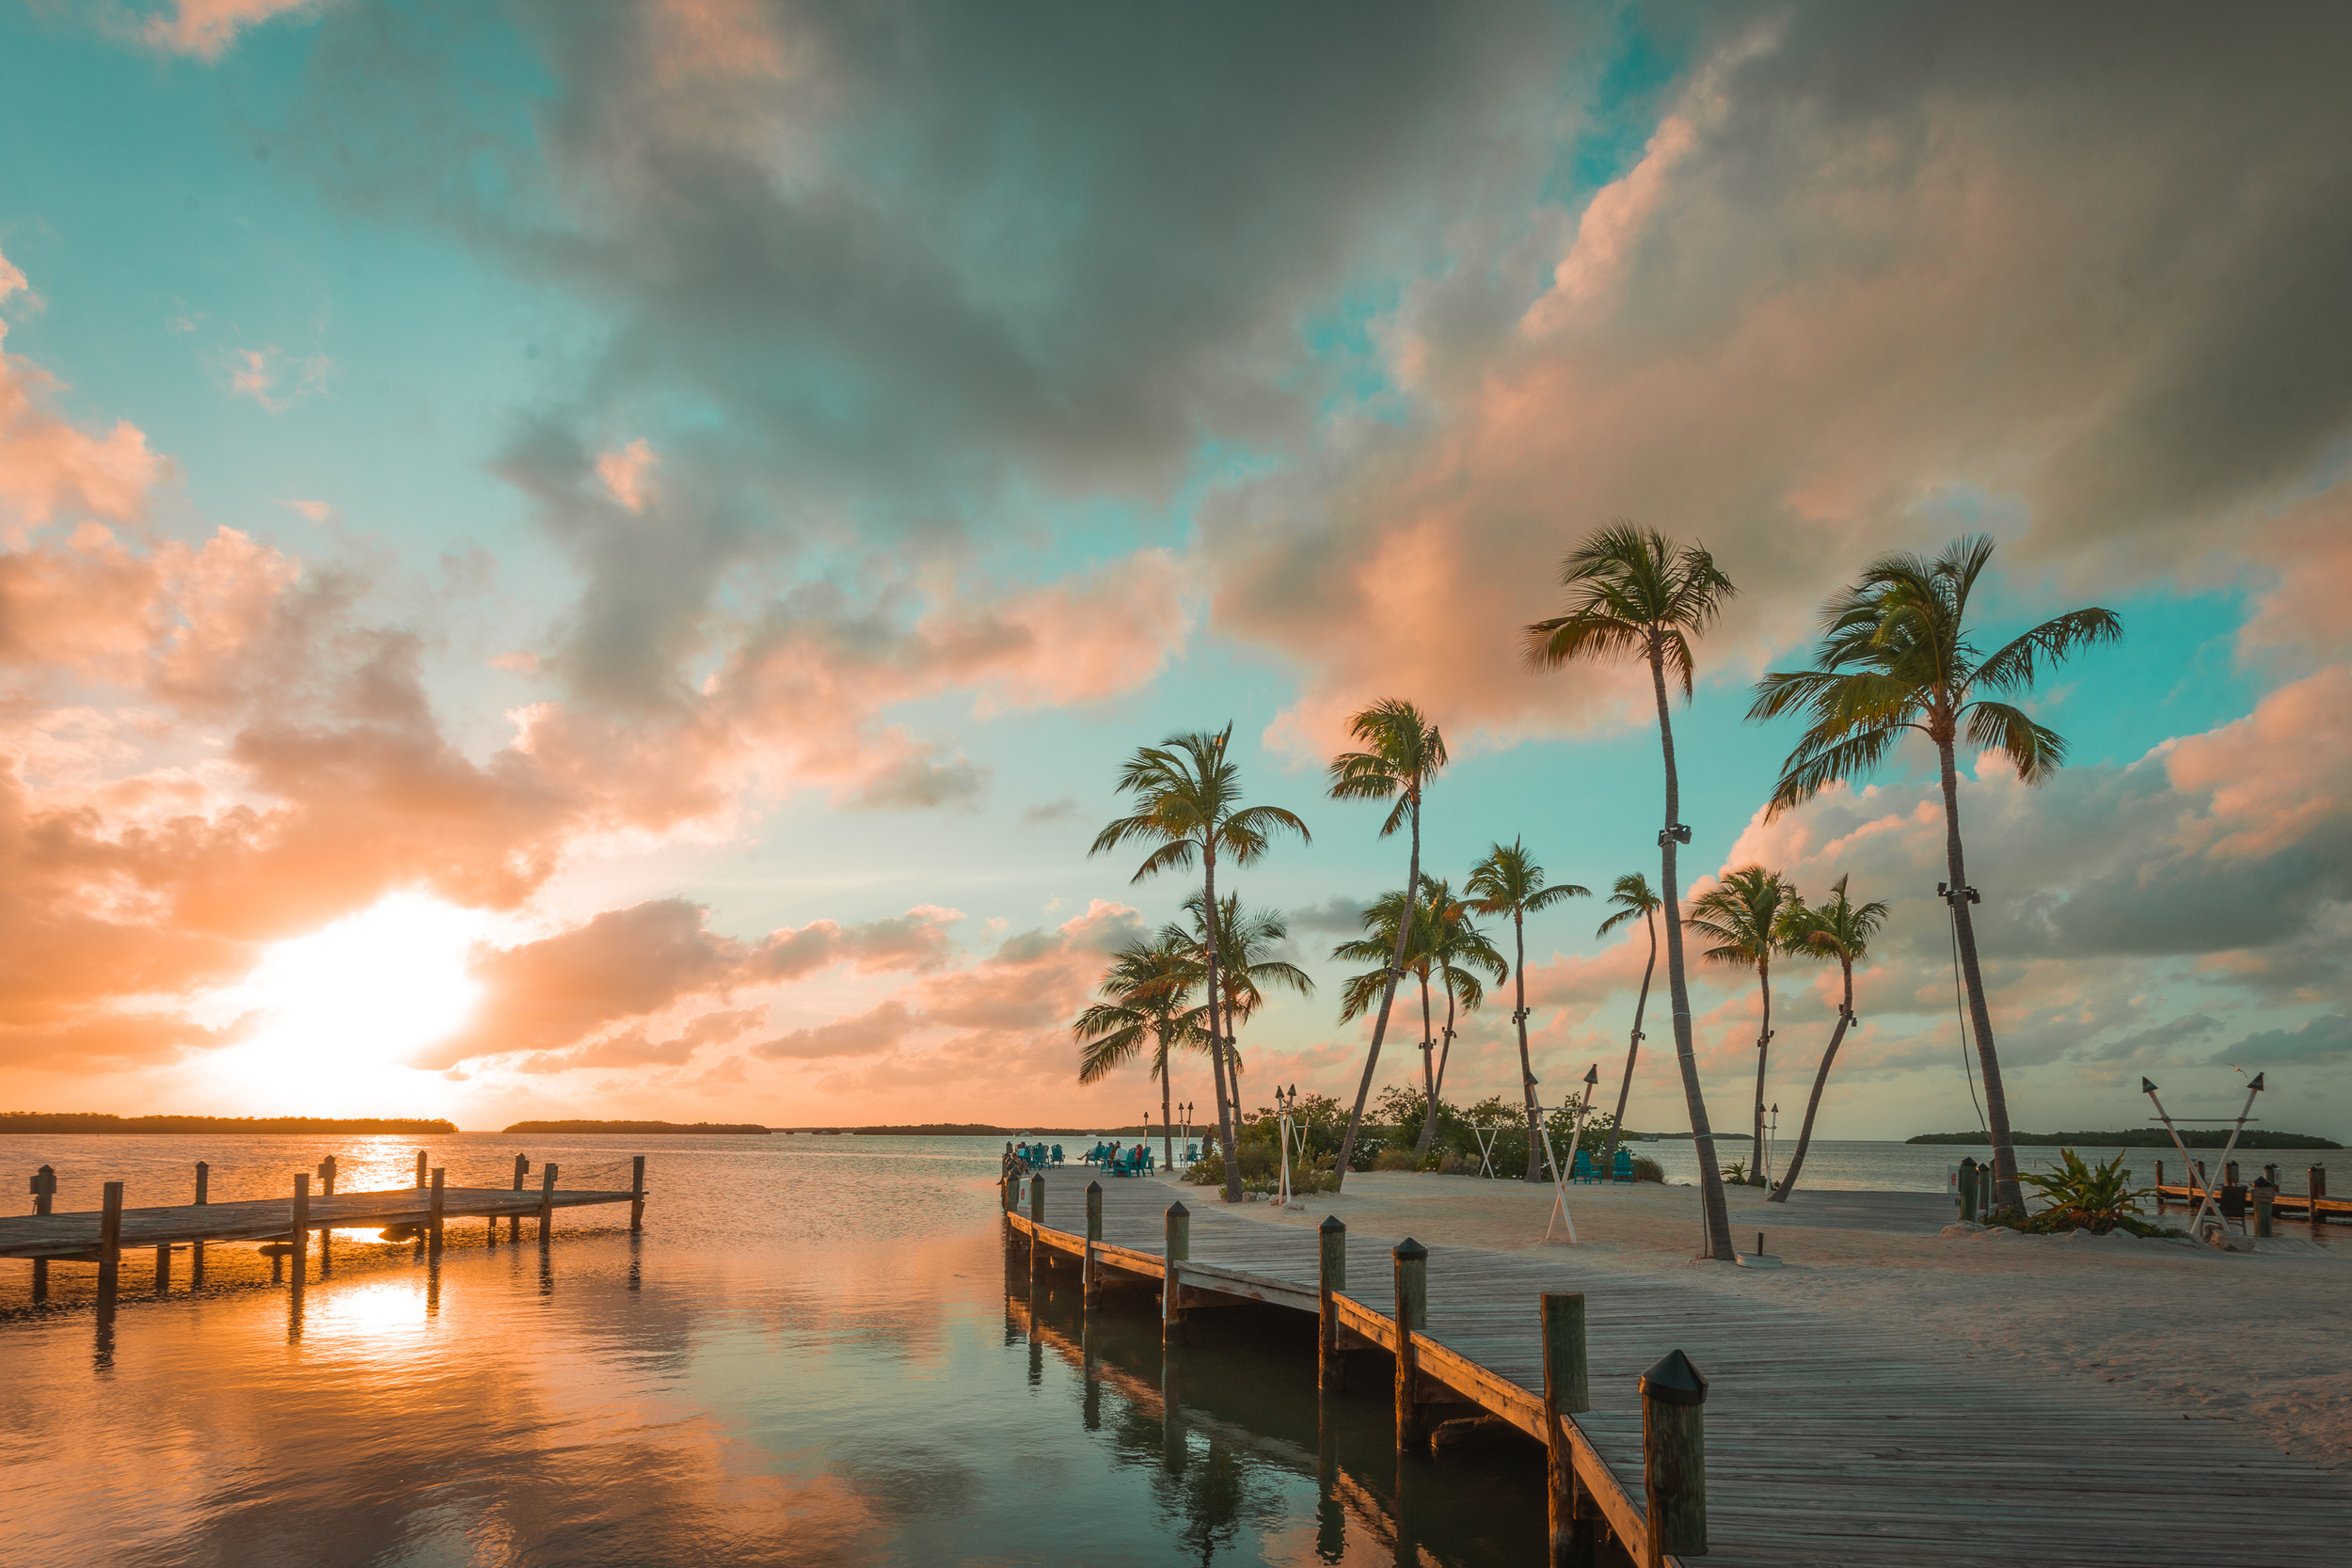 <p>If you don’t want to endure an international flight to escape the cold, no worries. Florida, specifically Key West, has you covered! Temps remain balmy (if humid) during the “winter,” which is why it’s such a popular destination amongst retirees and spring-breakers alike!</p><p><a href='https://www.msn.com/en-us/community/channel/vid-cj9pqbr0vn9in2b6ddcd8sfgpfq6x6utp44fssrv6mc2gtybw0us'>Follow us on MSN to see more of our exclusive lifestyle content.</a></p>